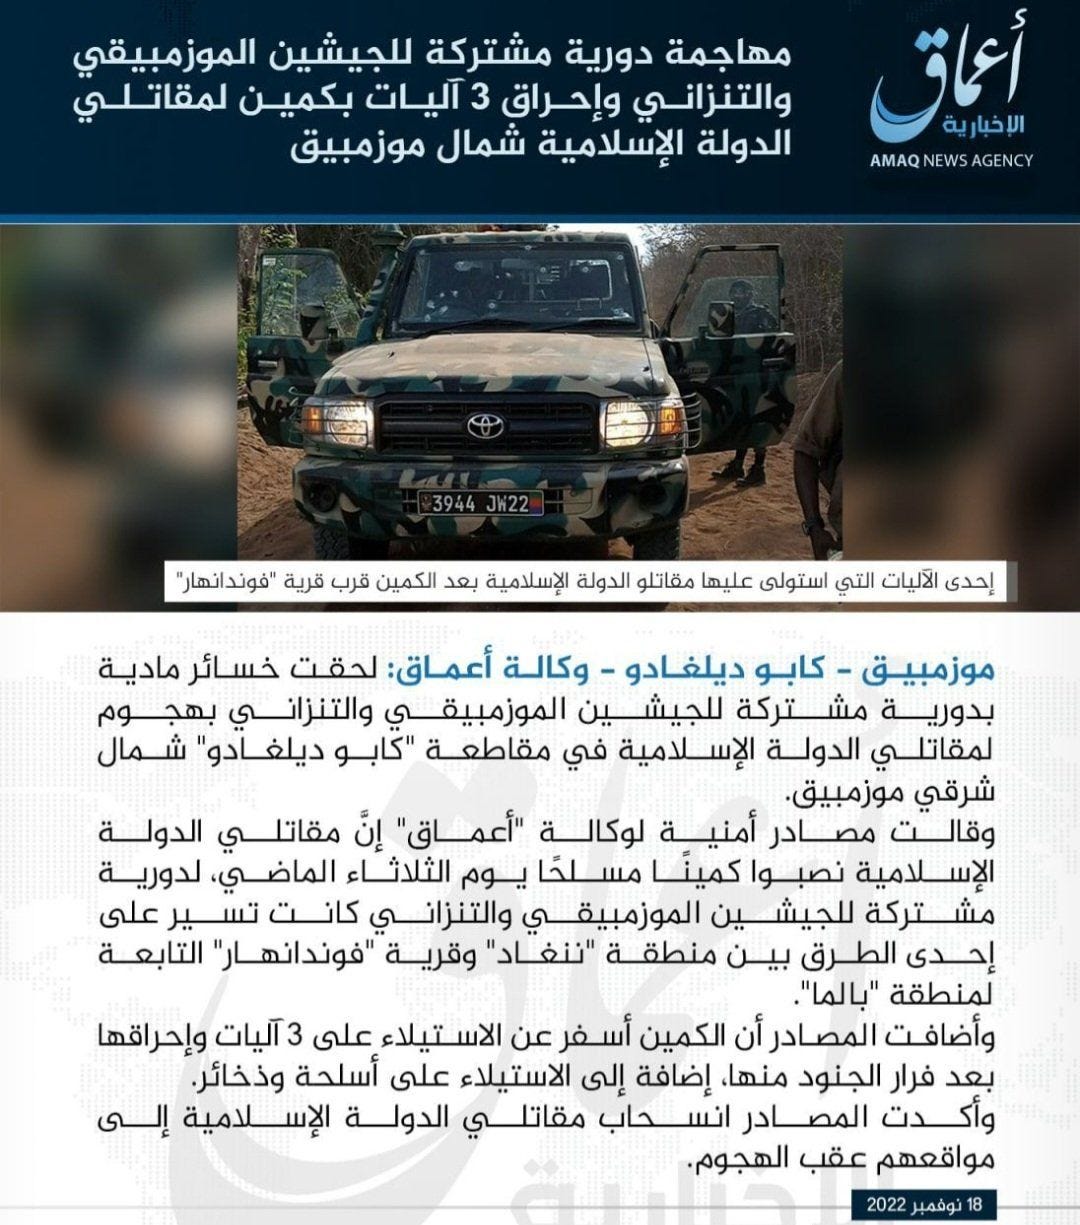 Mozambique: Islamic State affiliate insurgents post details of a November 15 ambush on Tanzania People's Defence Forces military convoy near Mungano, Nangade district